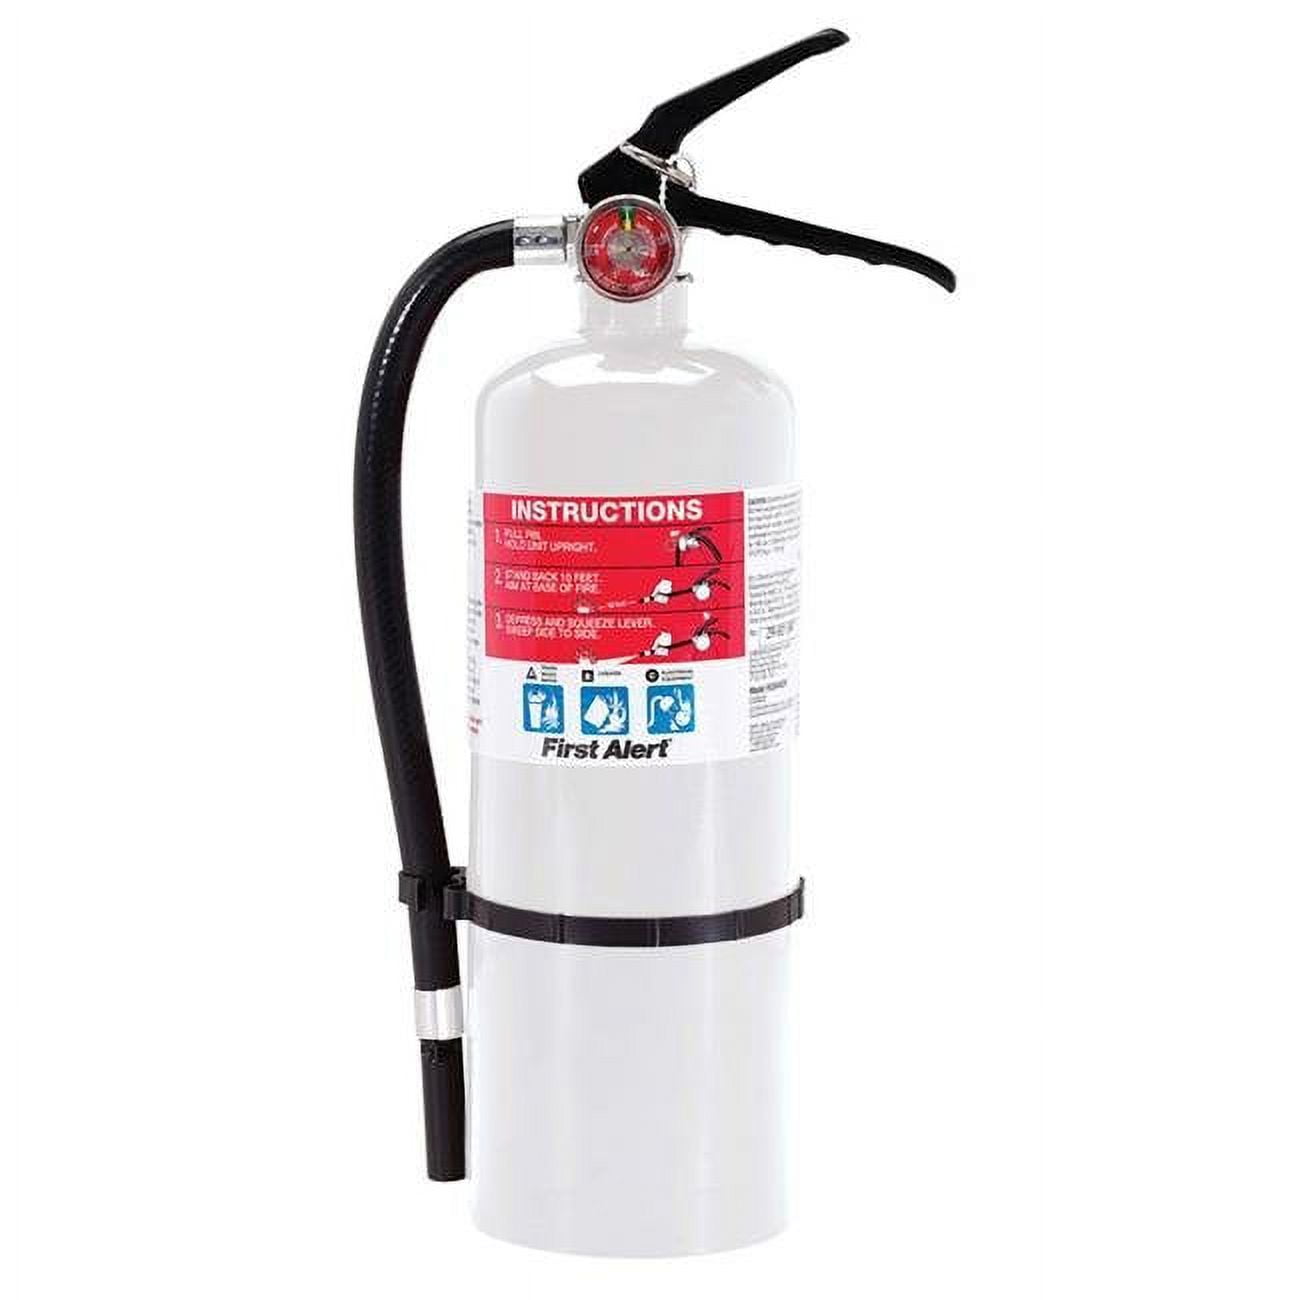 First Alert 8275570 5 lbs Fire Extinguisher for Home & Workshops US Coast Guard Agency Approval